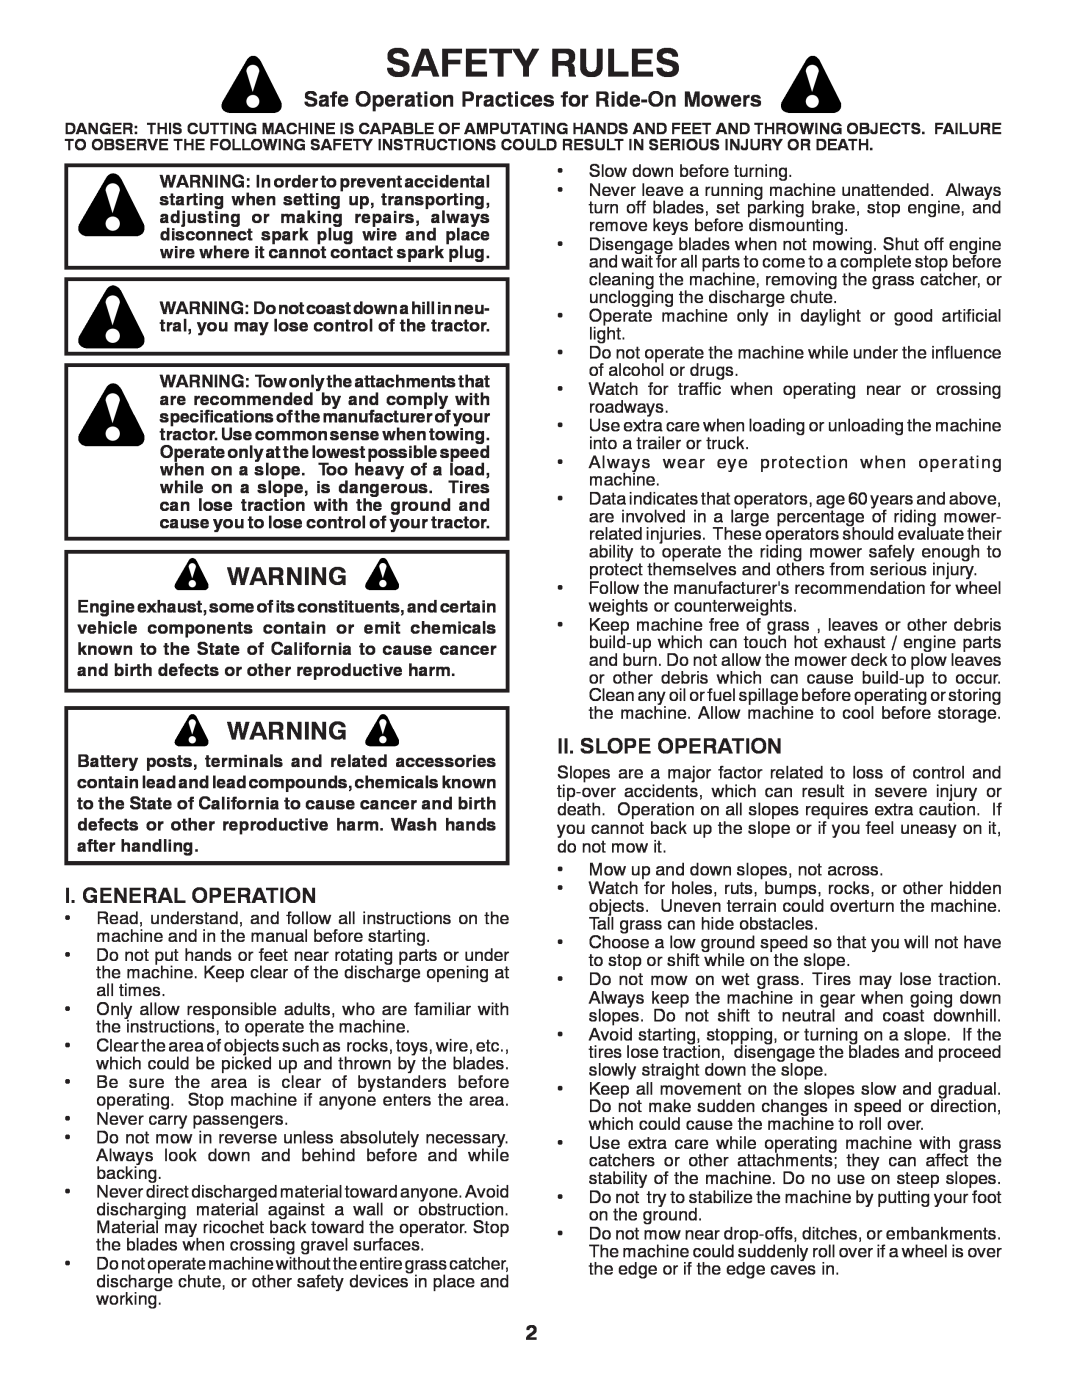 Husqvarna 917.24046 Safety Rules, Safe Operation Practices for Ride-On Mowers, I. General Operation, Ii. Slope Operation 